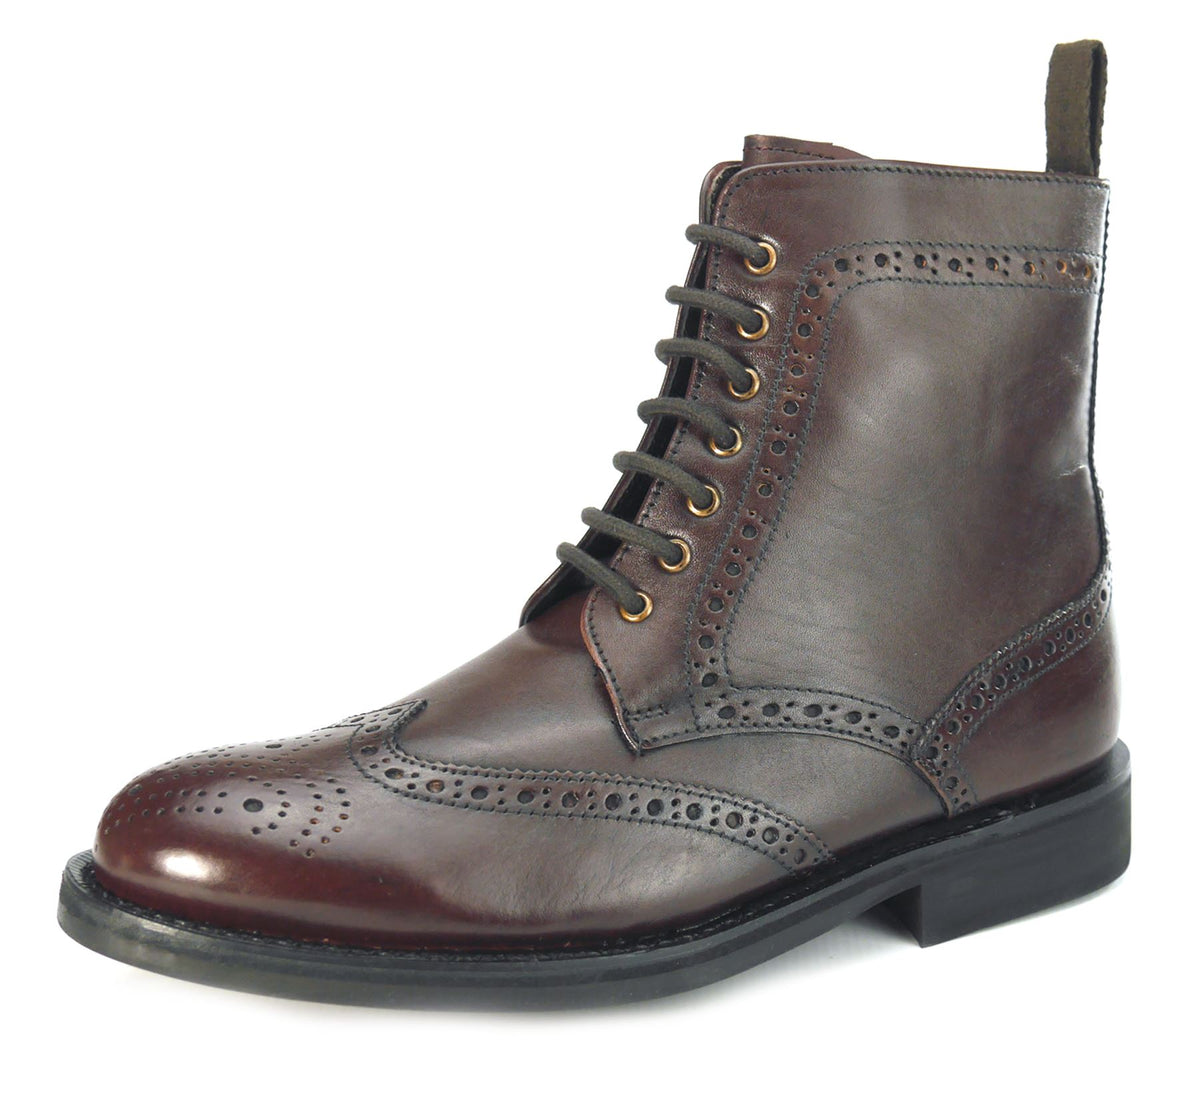 Frank James Benchgrade Cotswold Leather Welted Lace Up Brogue Rubber Sole Dealer Boots